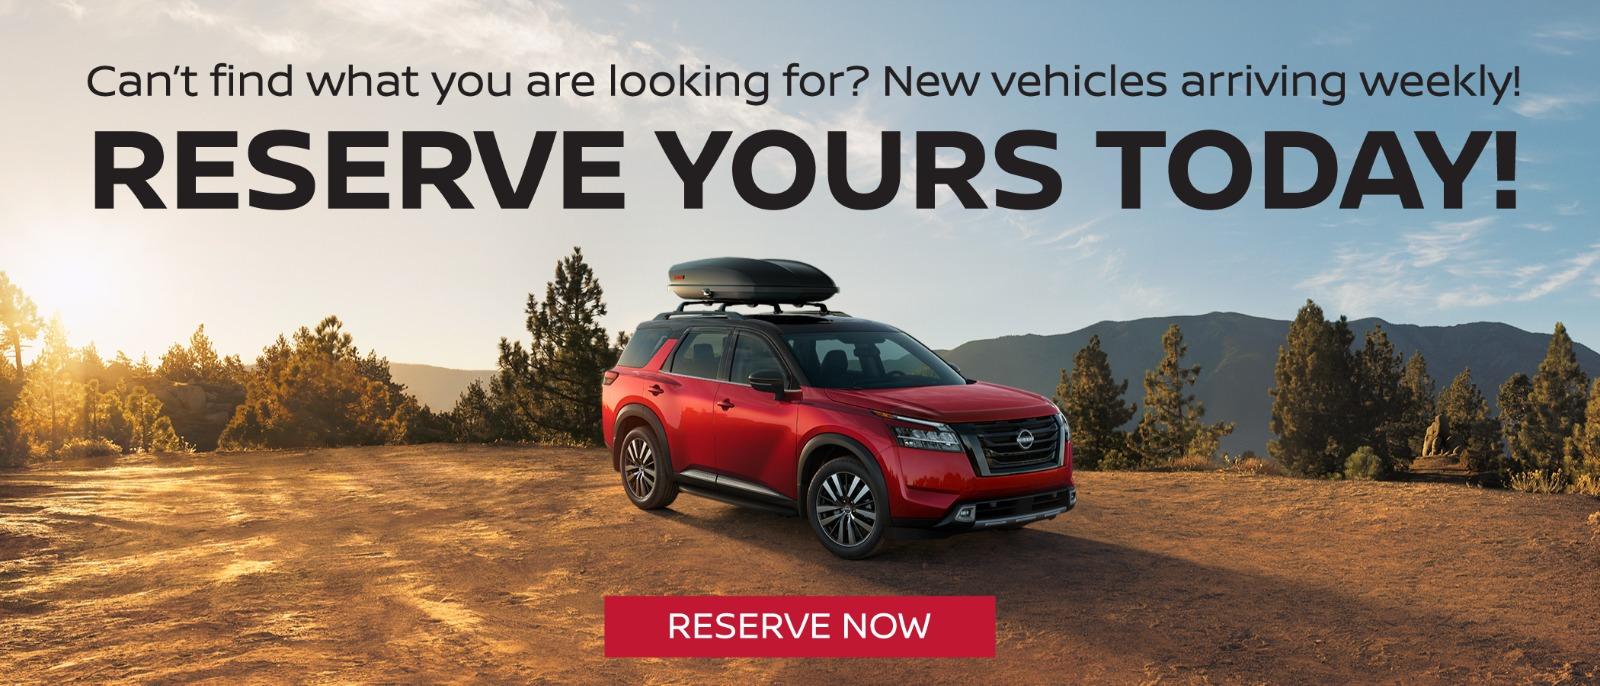 Reserve Your Vehicle